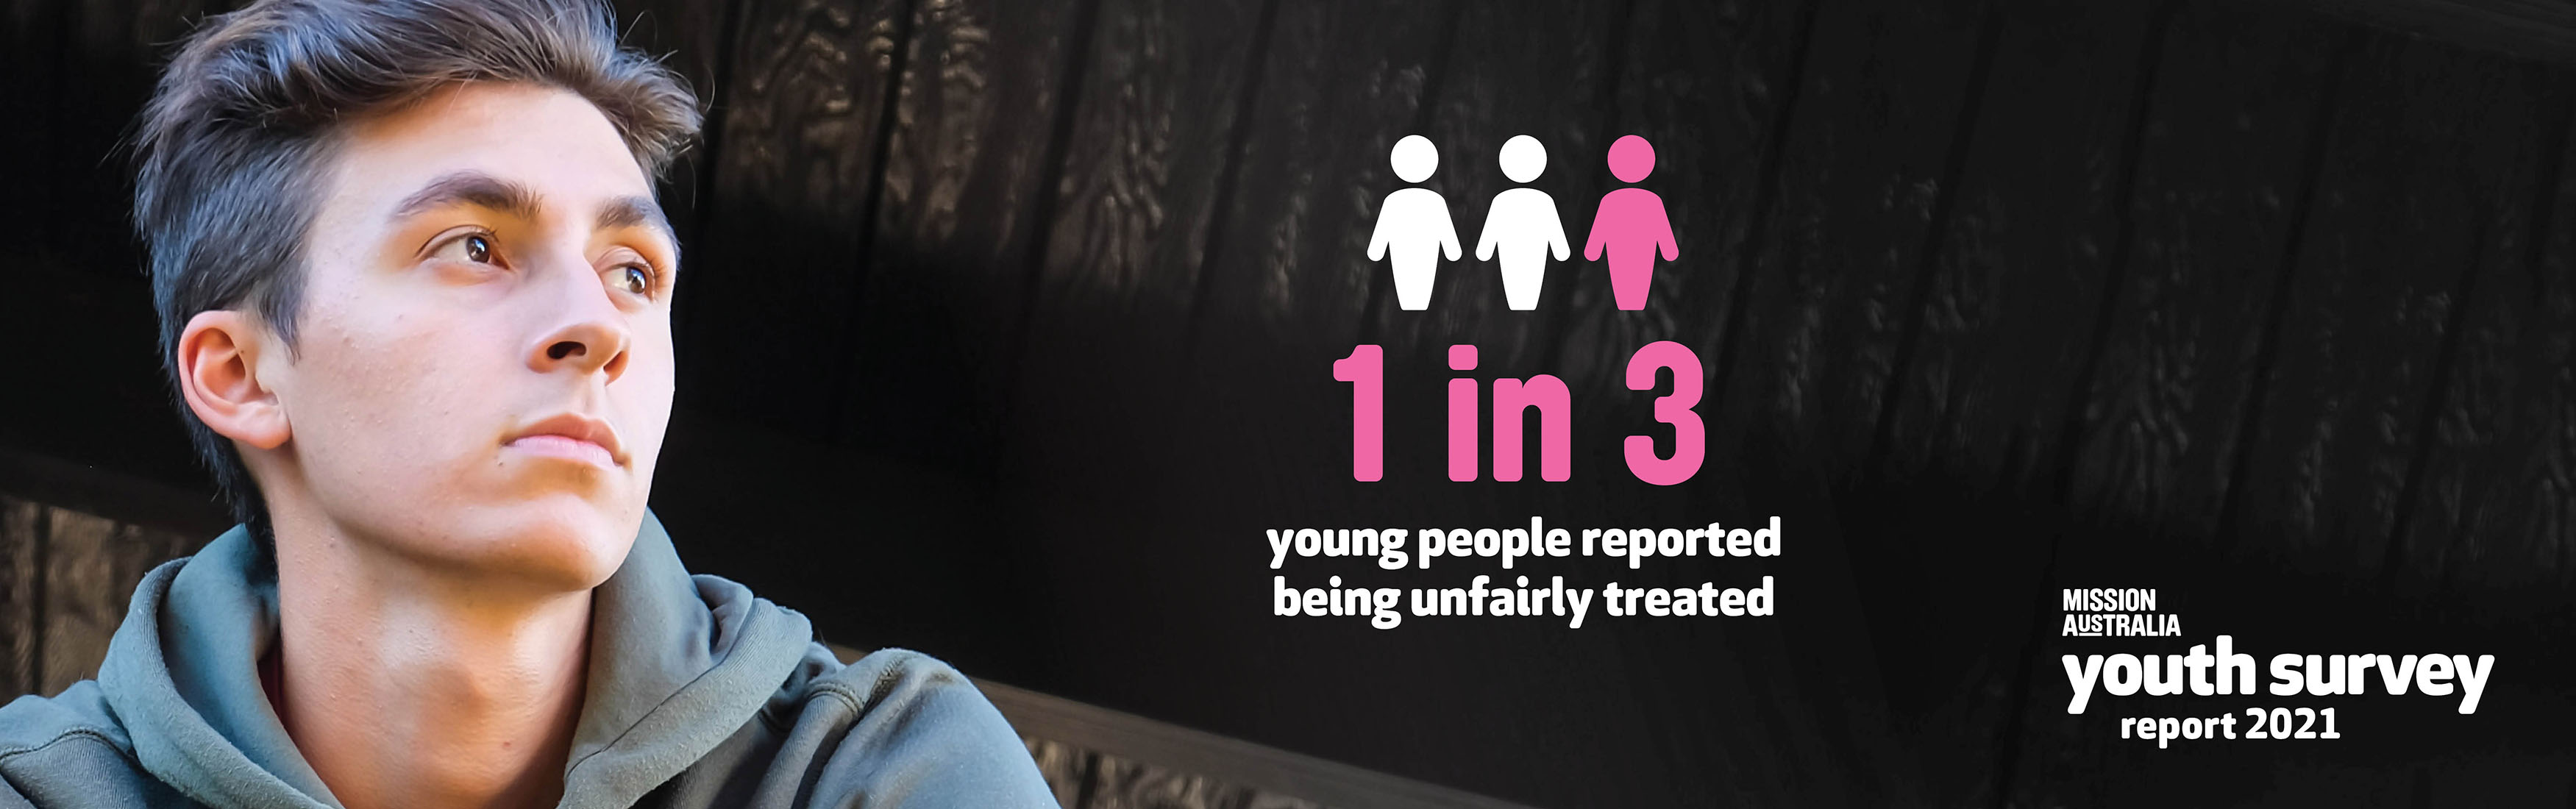 Image of a concerned young man sitting down. Text on top of image reads, “One in three young people reported being unfairly treated.”